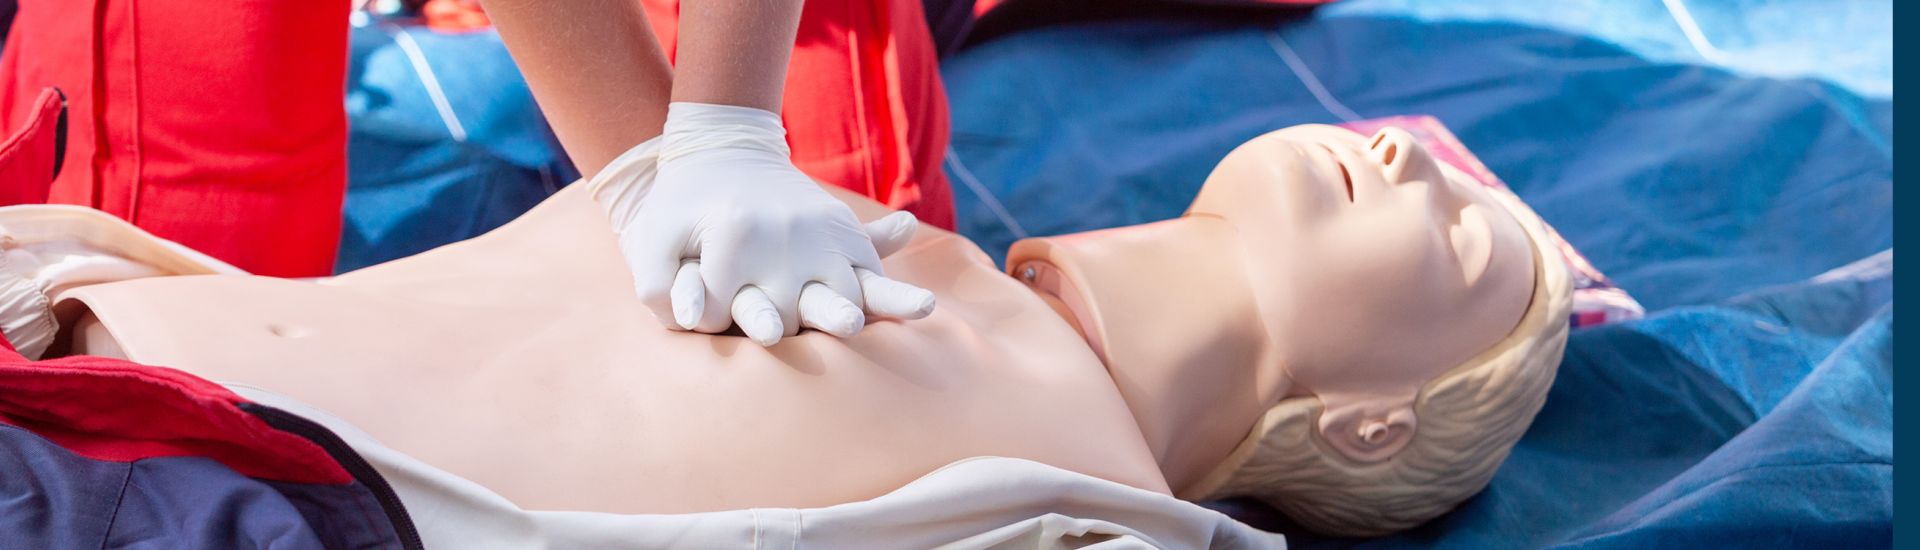 Someone practicing CPR on a training dummy